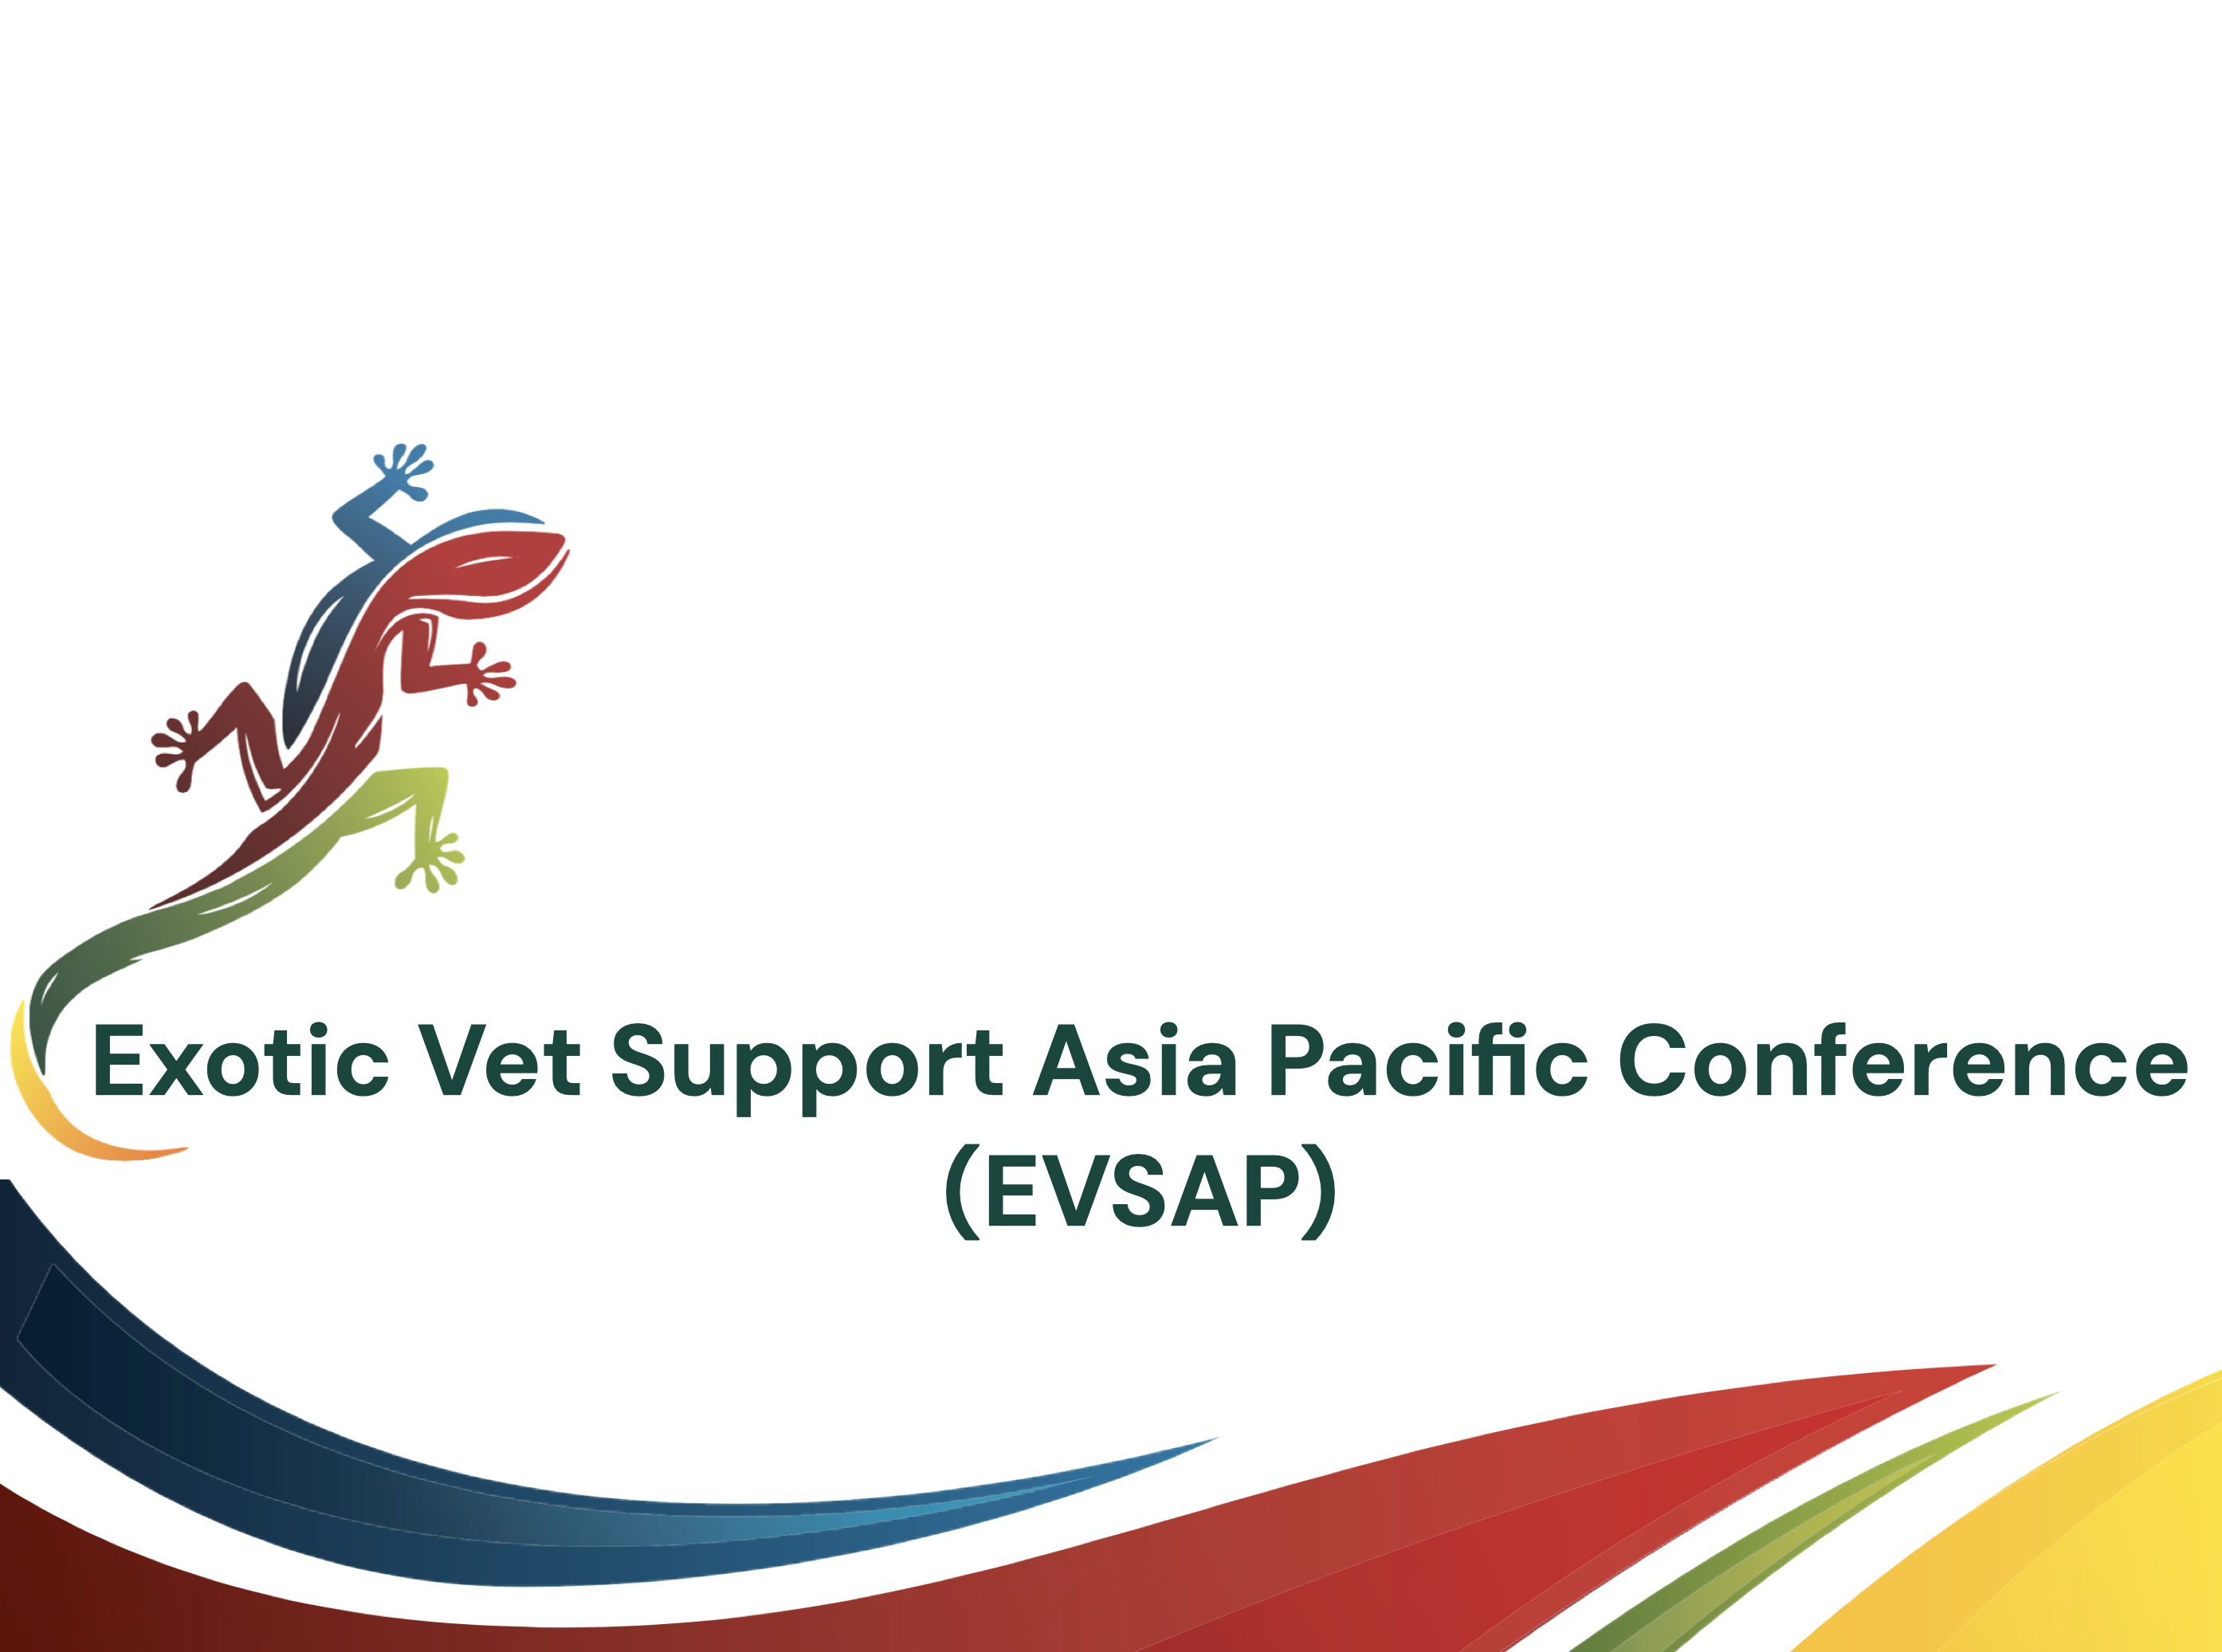 Exotic Vet Support Asia Pacific Conference (EVSAP)